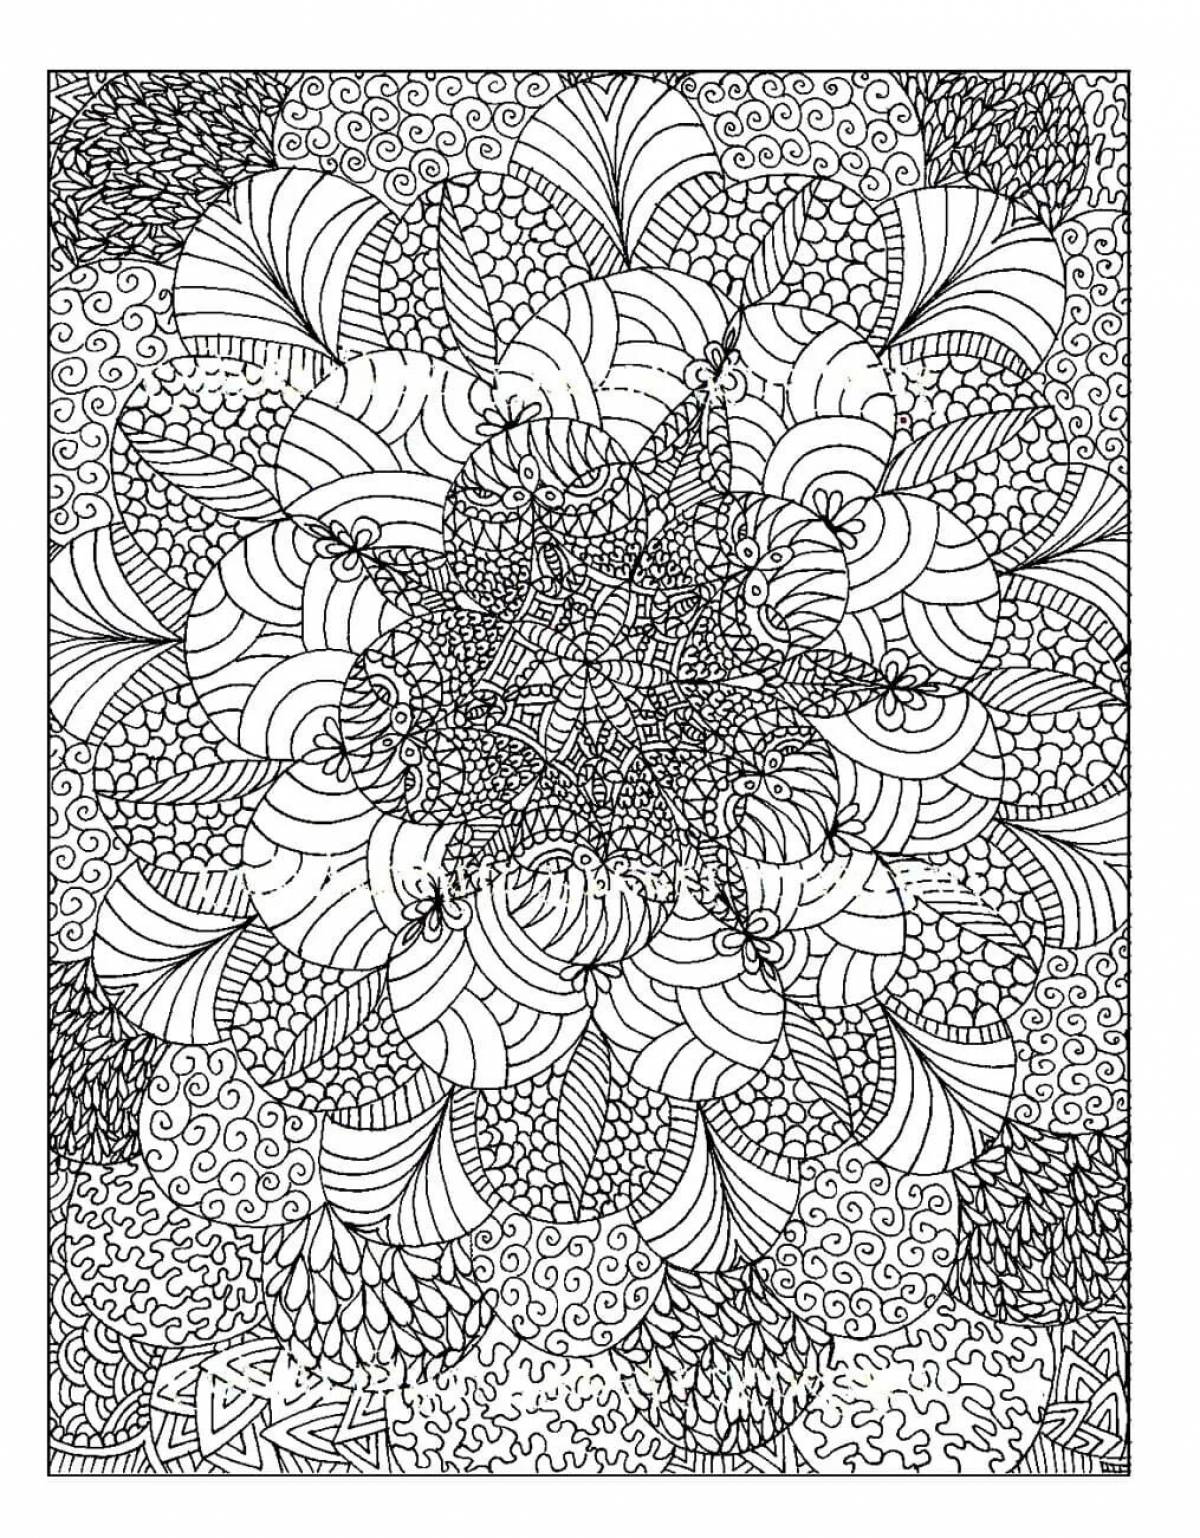 Coloring book peaceful anti-stress patterns